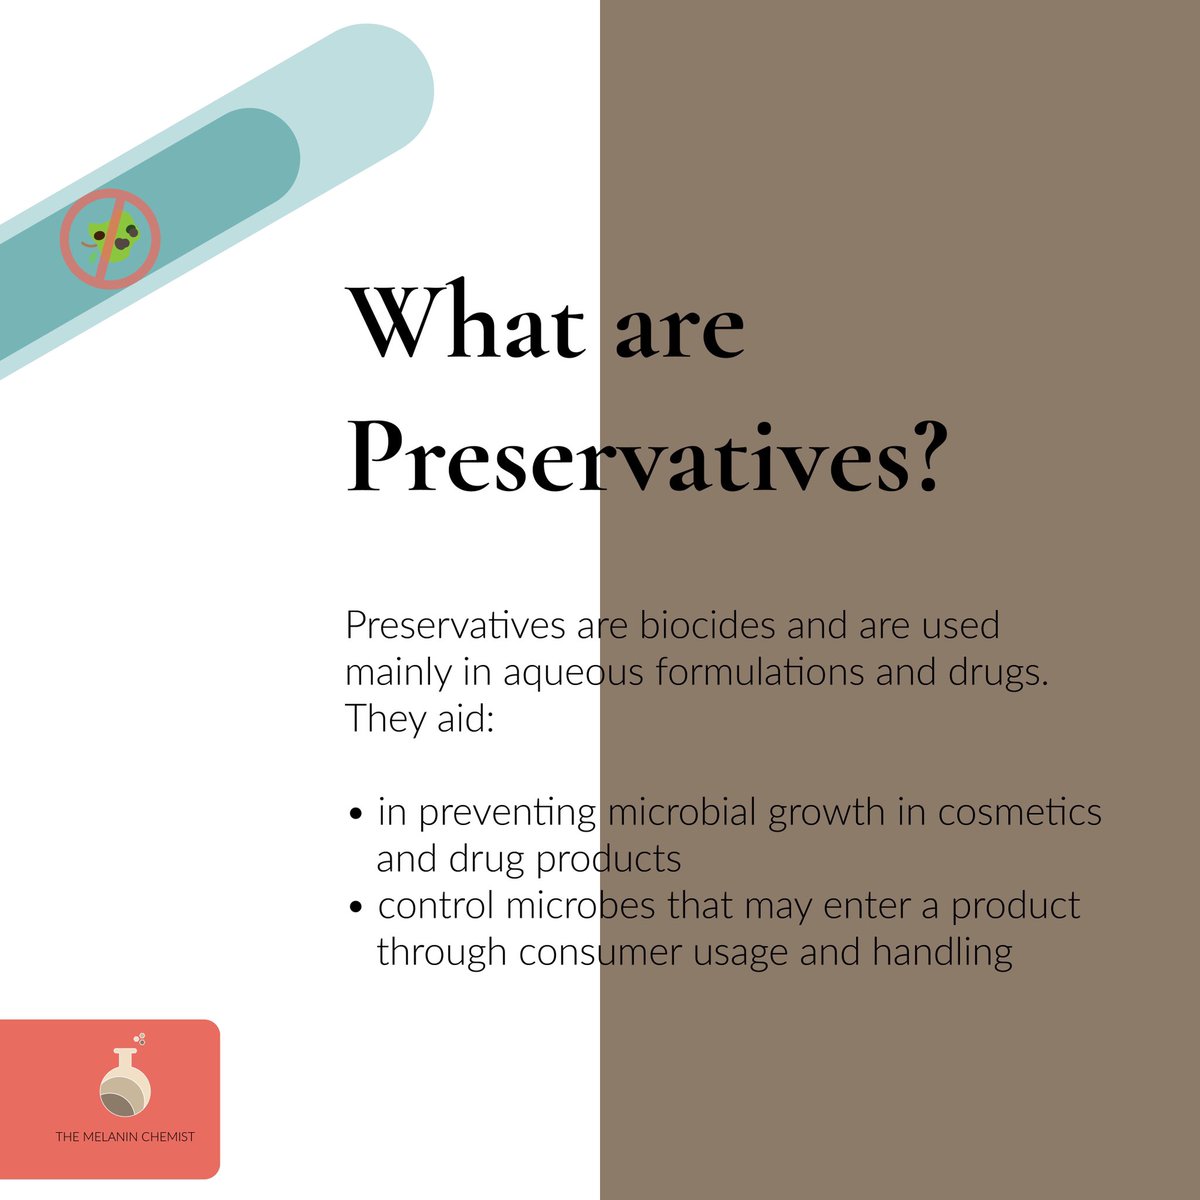 So let’s start with the basics. What exactly is a preservative? It is a substance/chemical that helps control microbes that can enter products through the raw materials, during manufacturing, and through consumer usage and handling.